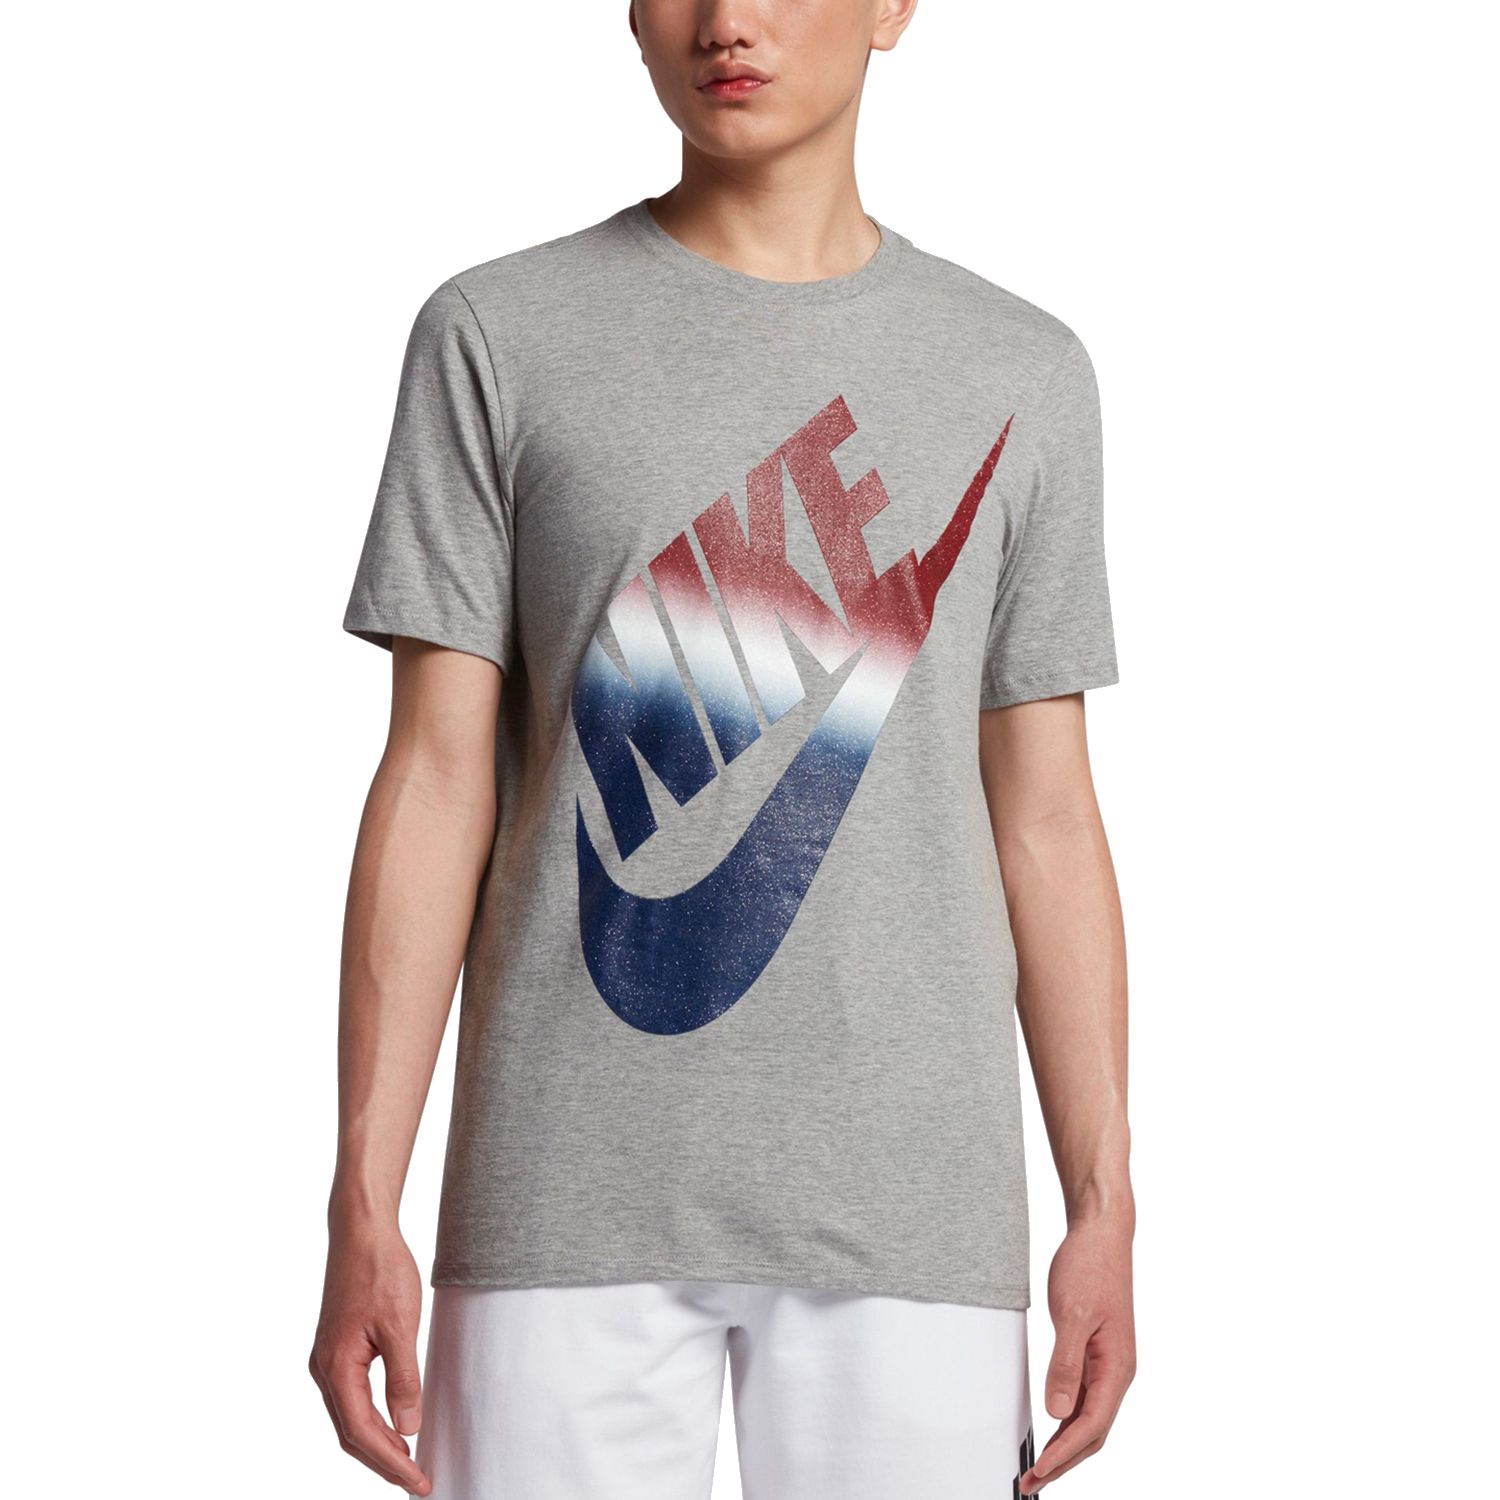 light blue and red nike shirt